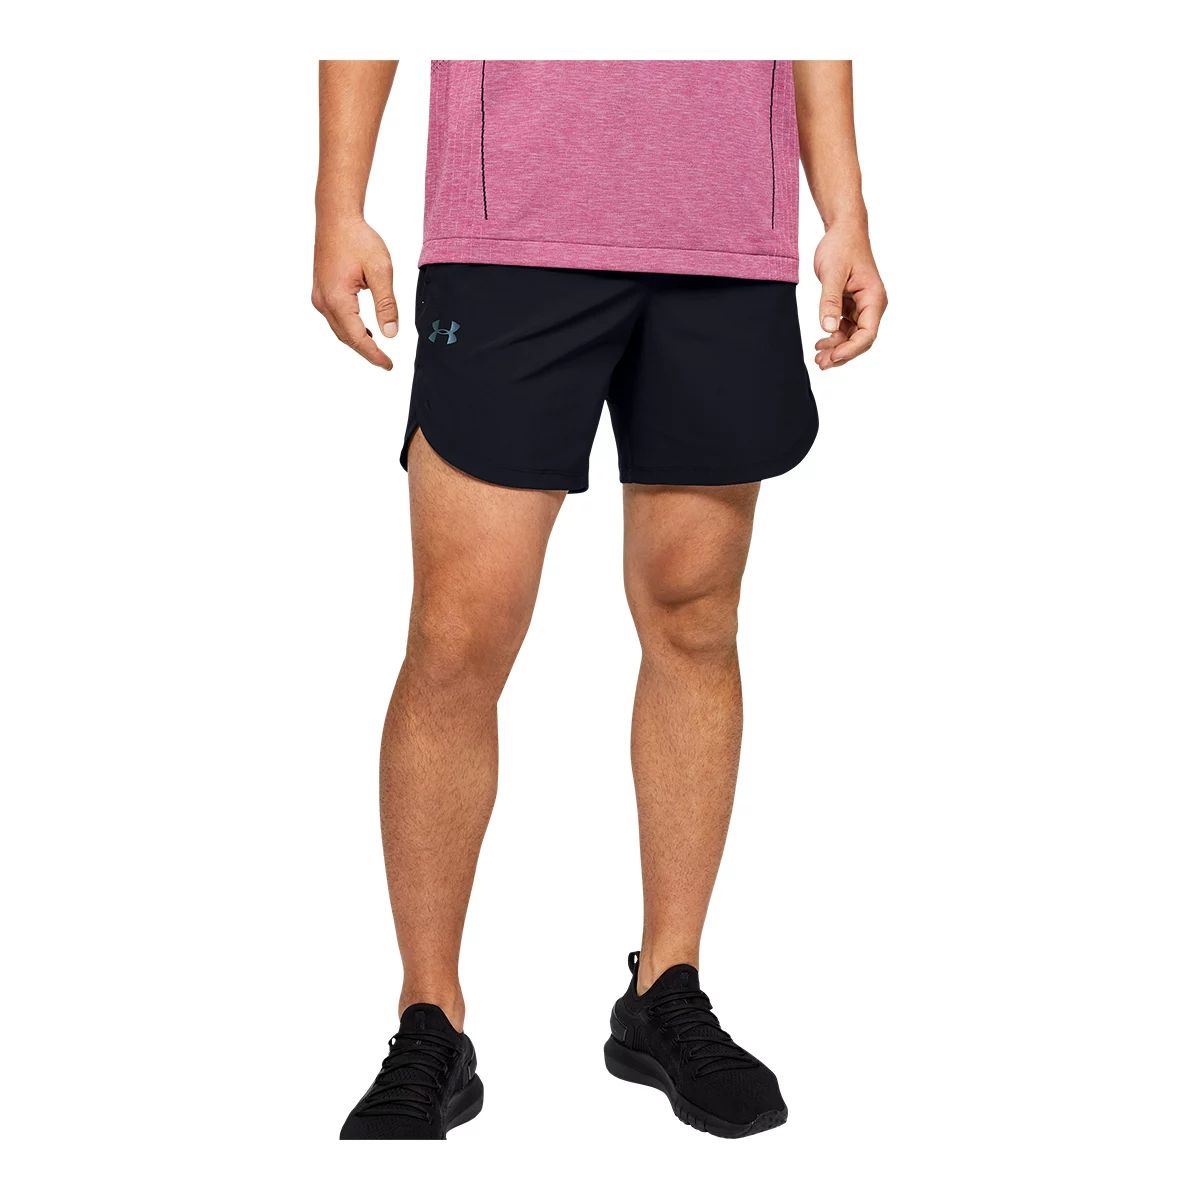 Under Armour Men's Stretch Woven 7" Shorts  Regular Fit Gym Drawstring Breathable